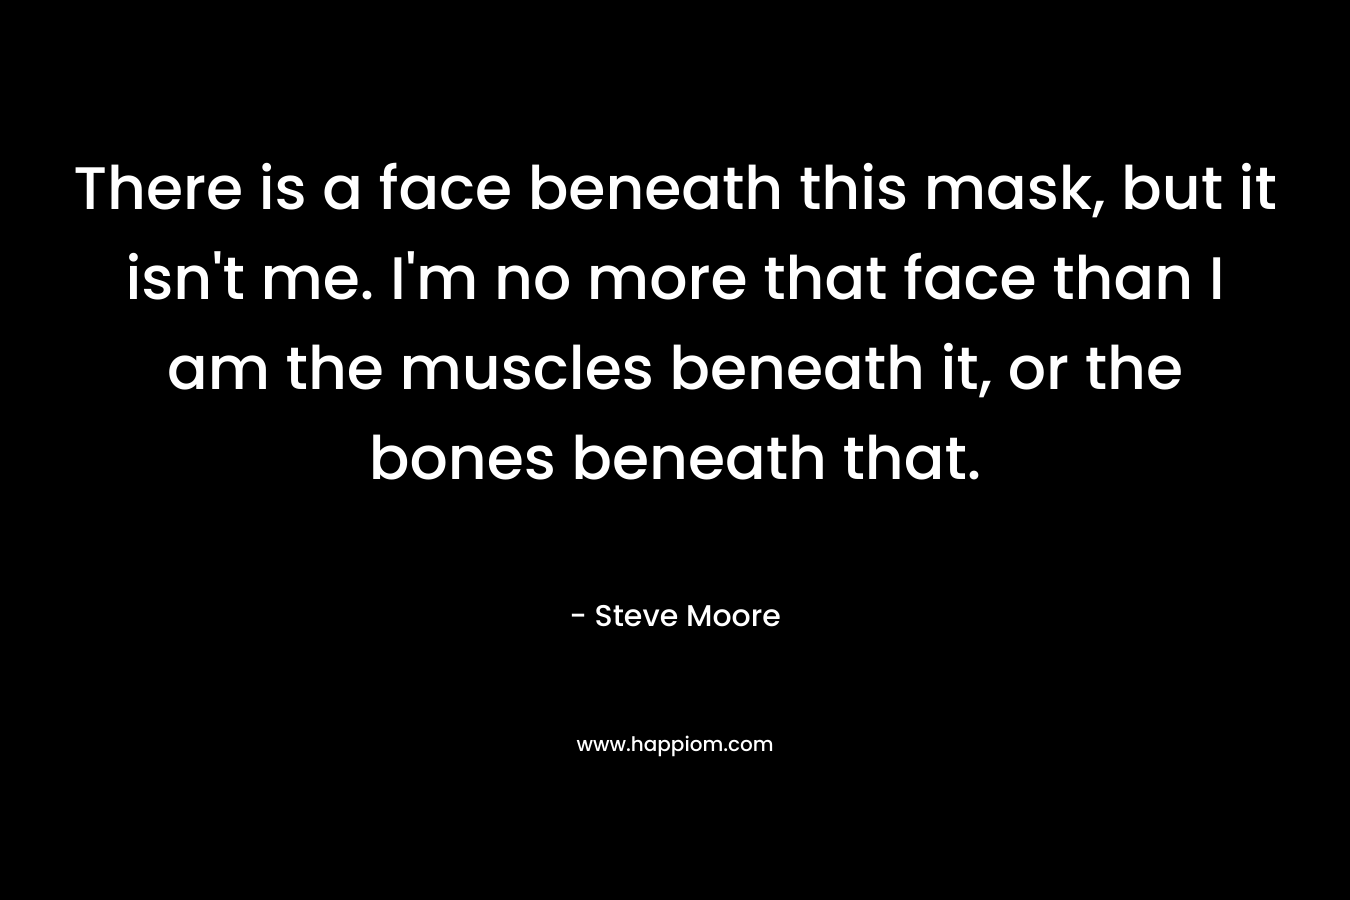 There is a face beneath this mask, but it isn't me. I'm no more that face than I am the muscles beneath it, or the bones beneath that.